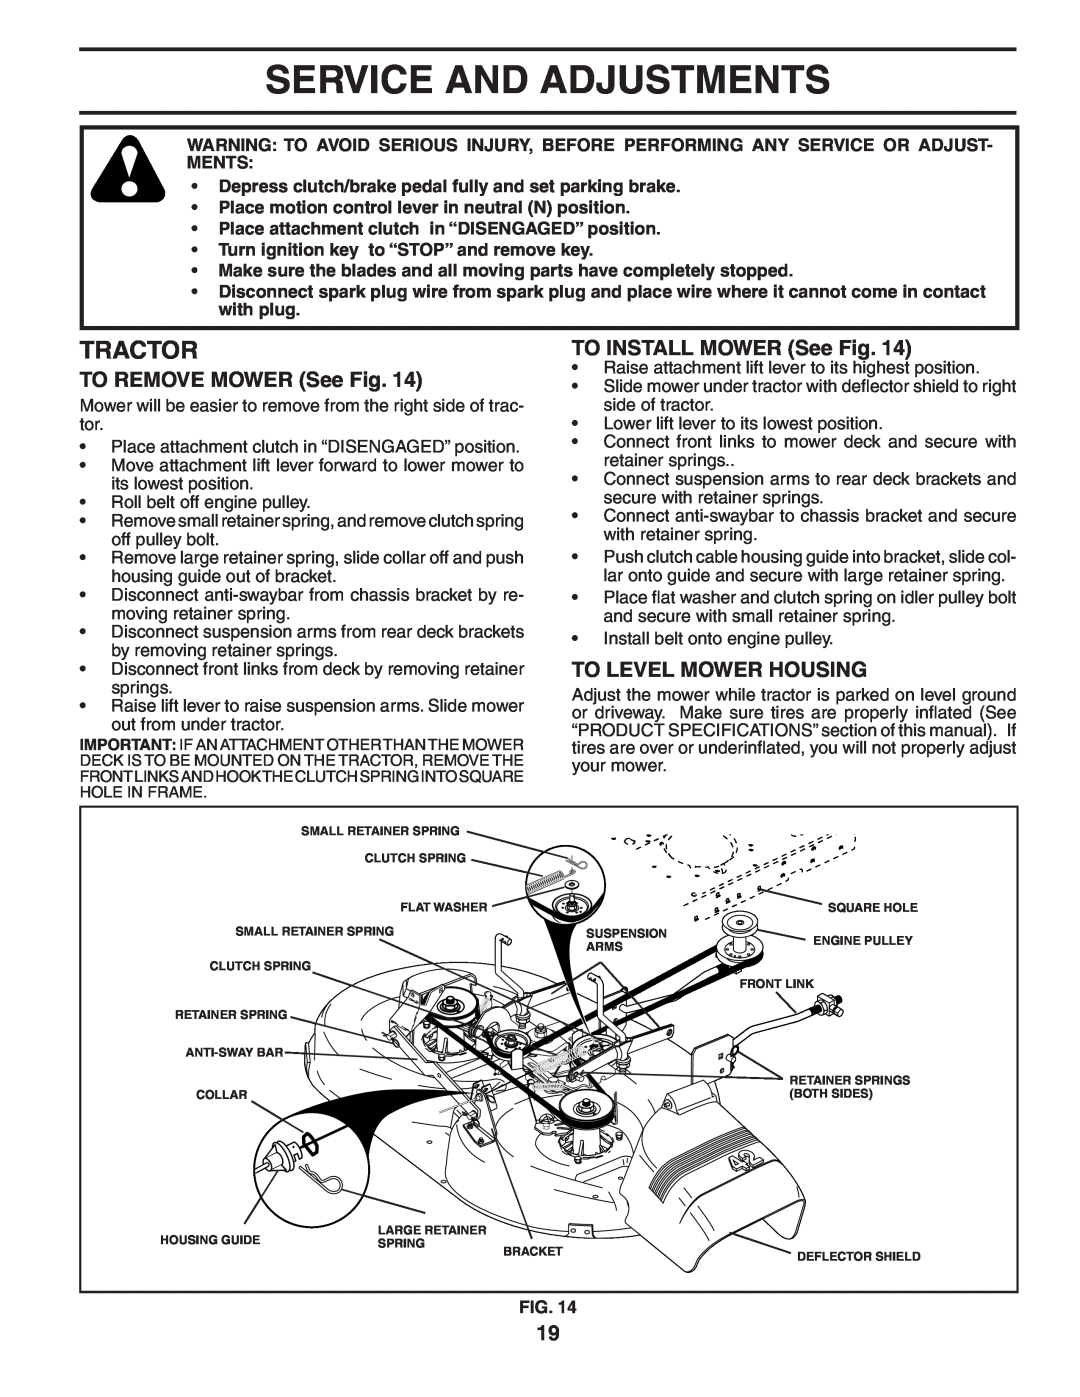 Poulan 403444 Service And Adjustments, TO REMOVE MOWER See Fig, TO INSTALL MOWER See Fig, To Level Mower Housing, Tractor 